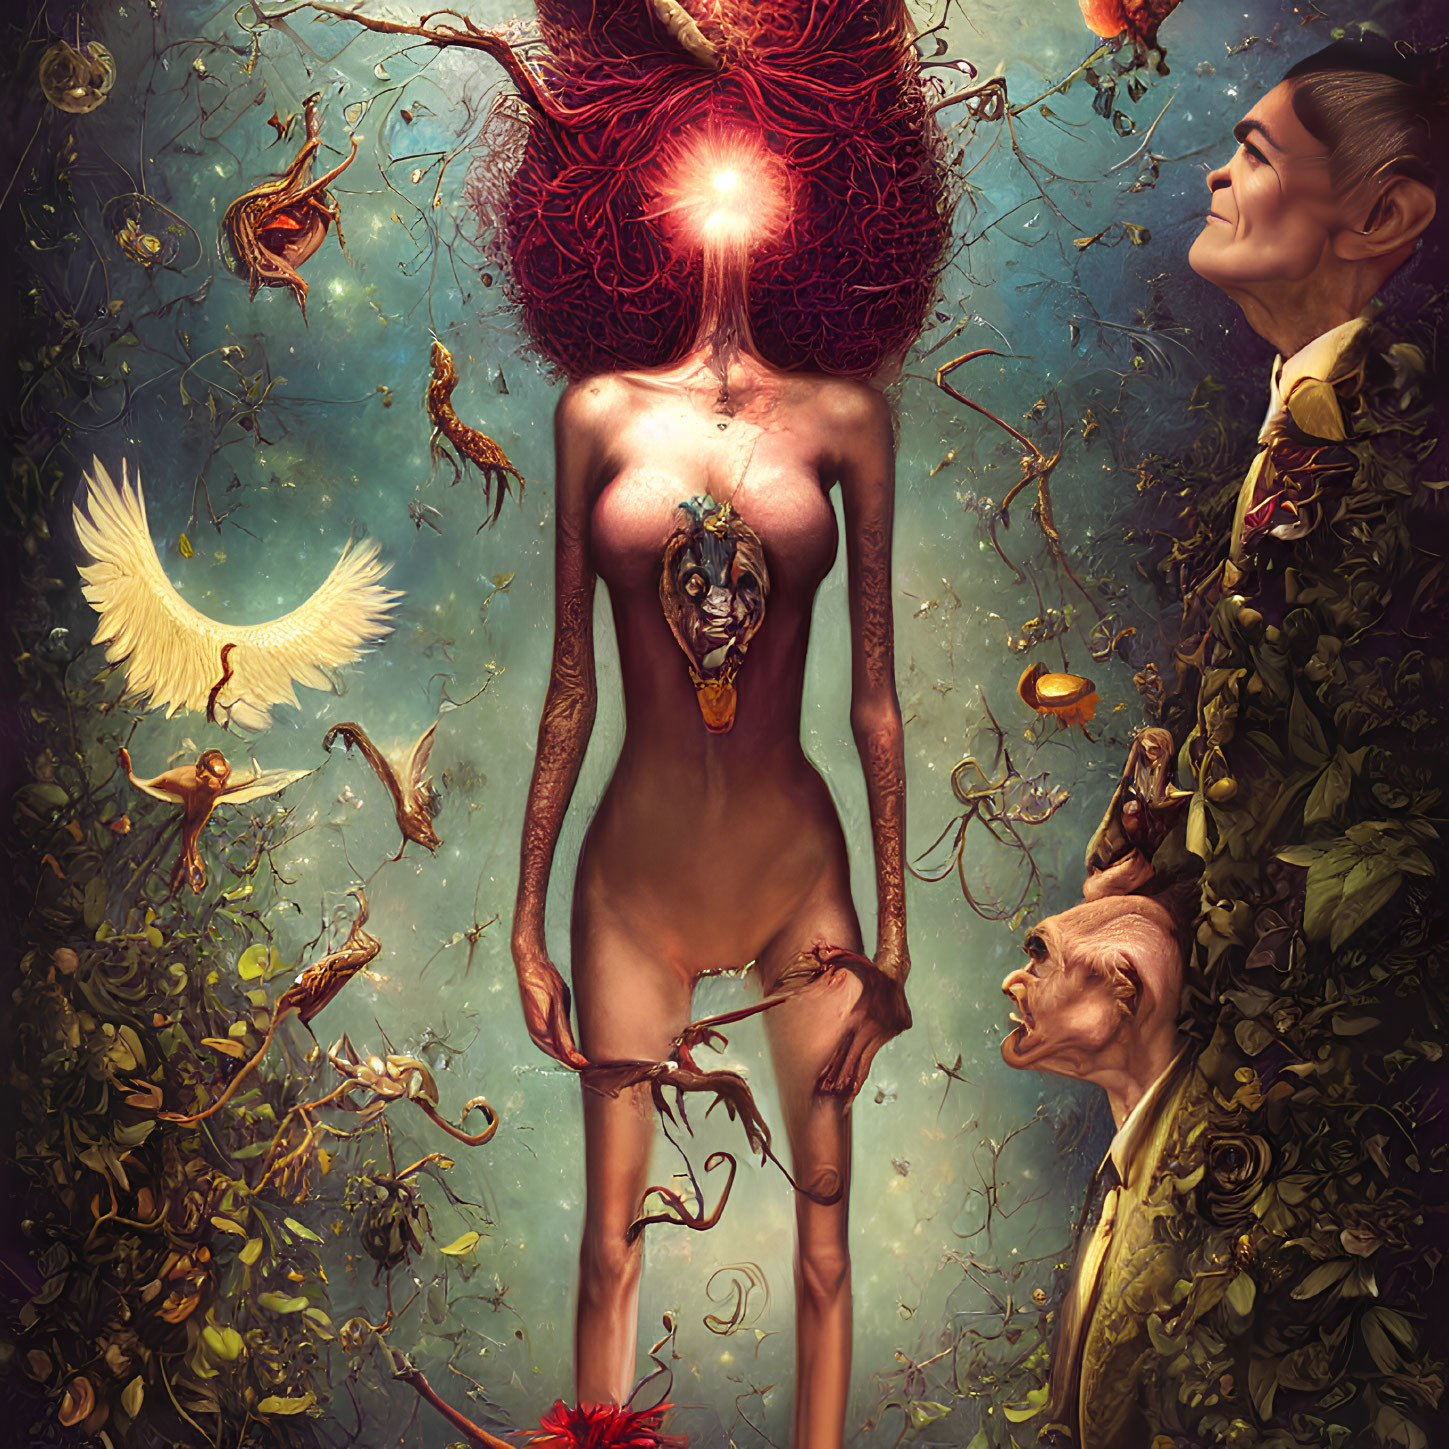 Vibrant surreal artwork: Woman with red hair, glowing heart, mystical creatures in fantastical flora